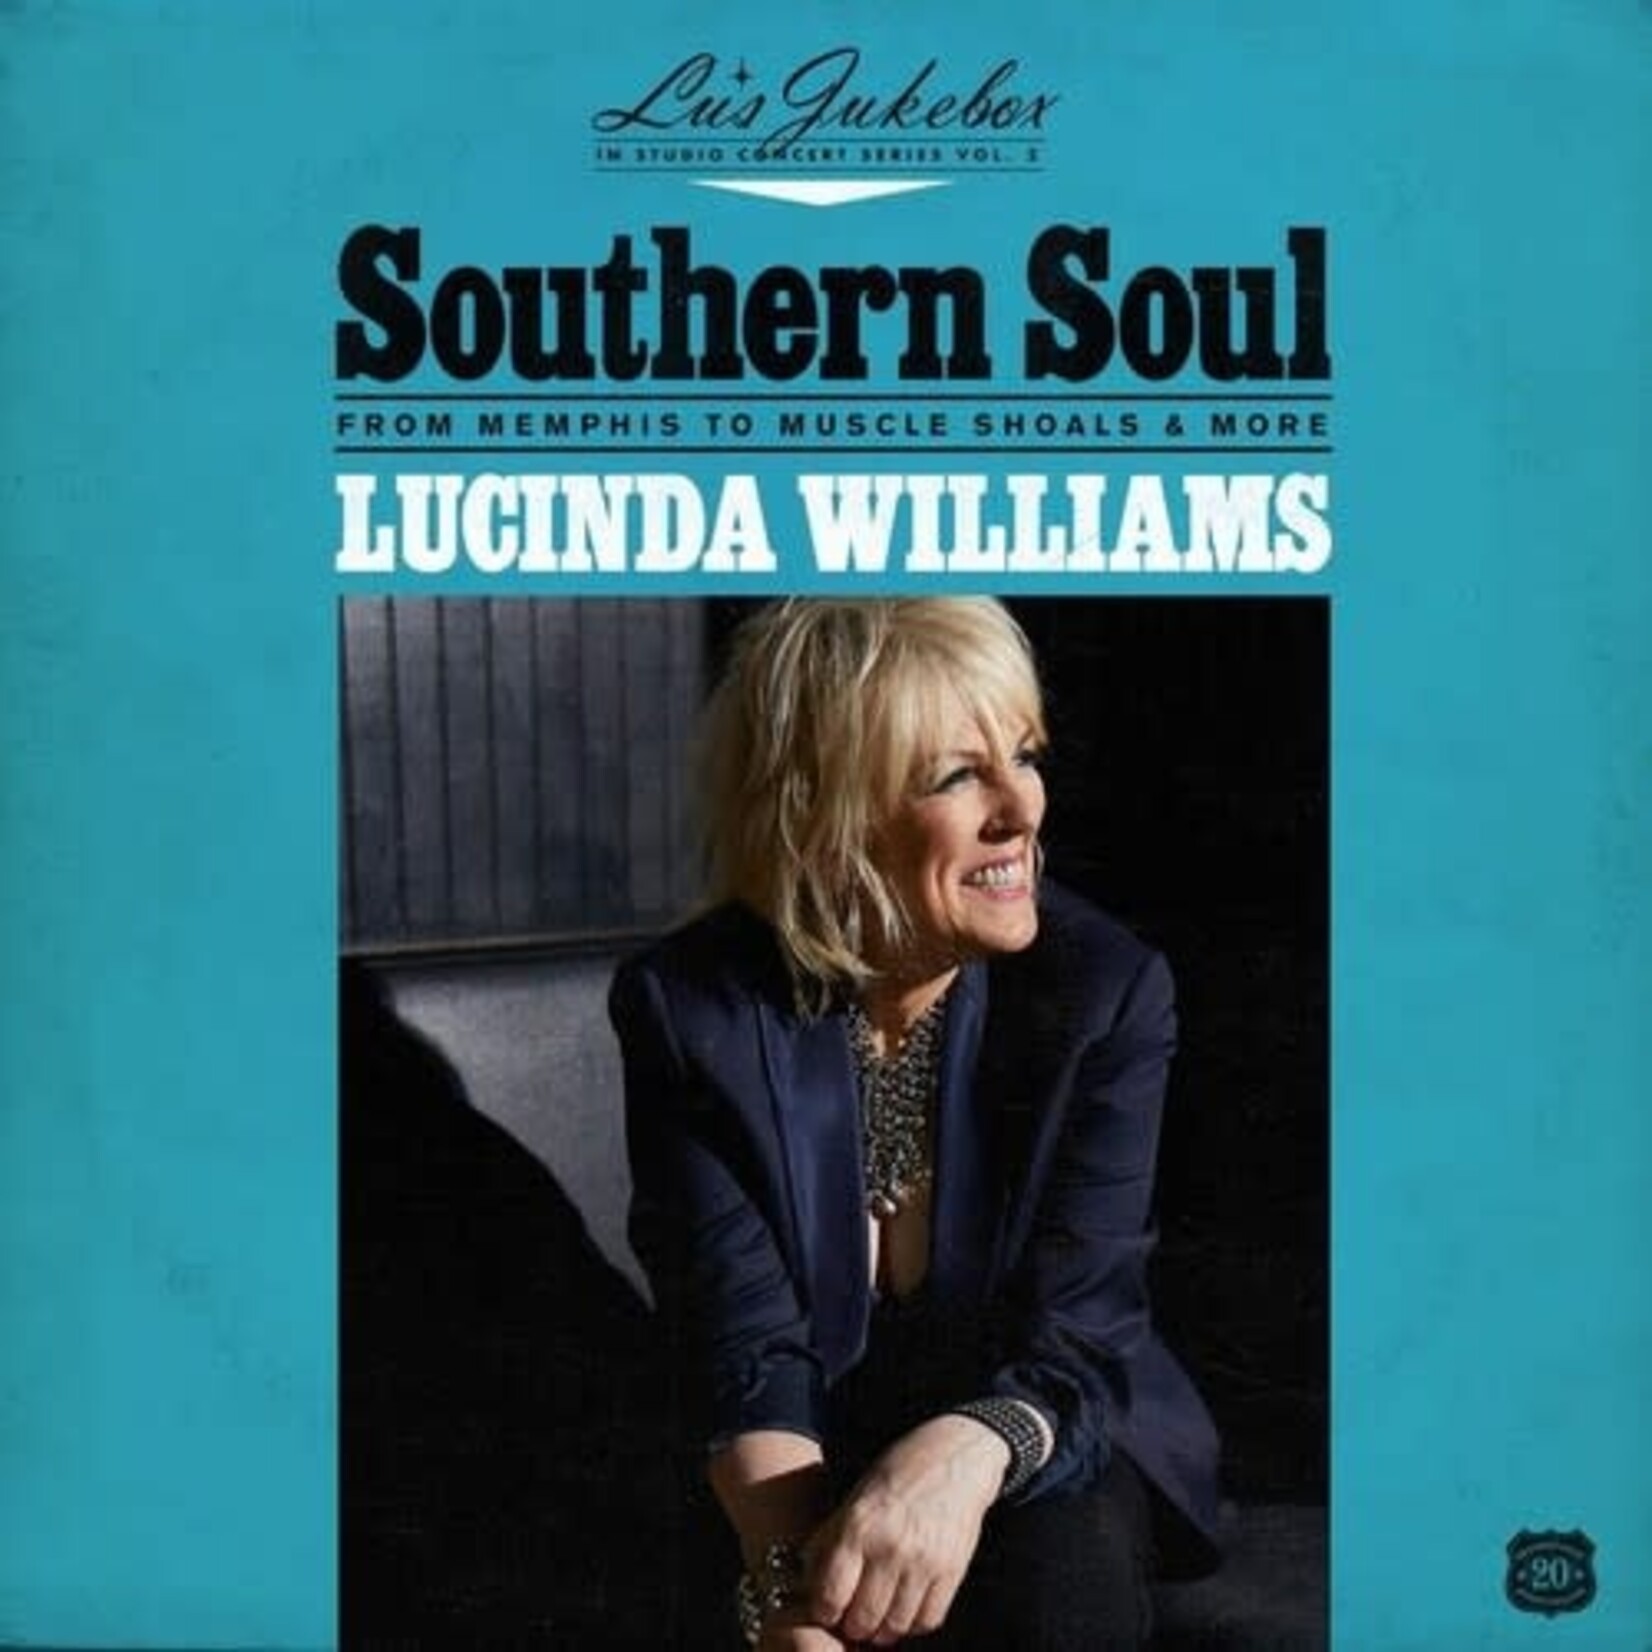 Lucinda Williams - Southern Soul: From Memphis To Muscle Shoals (Lu's Jukebox Vol. 2) [CD]